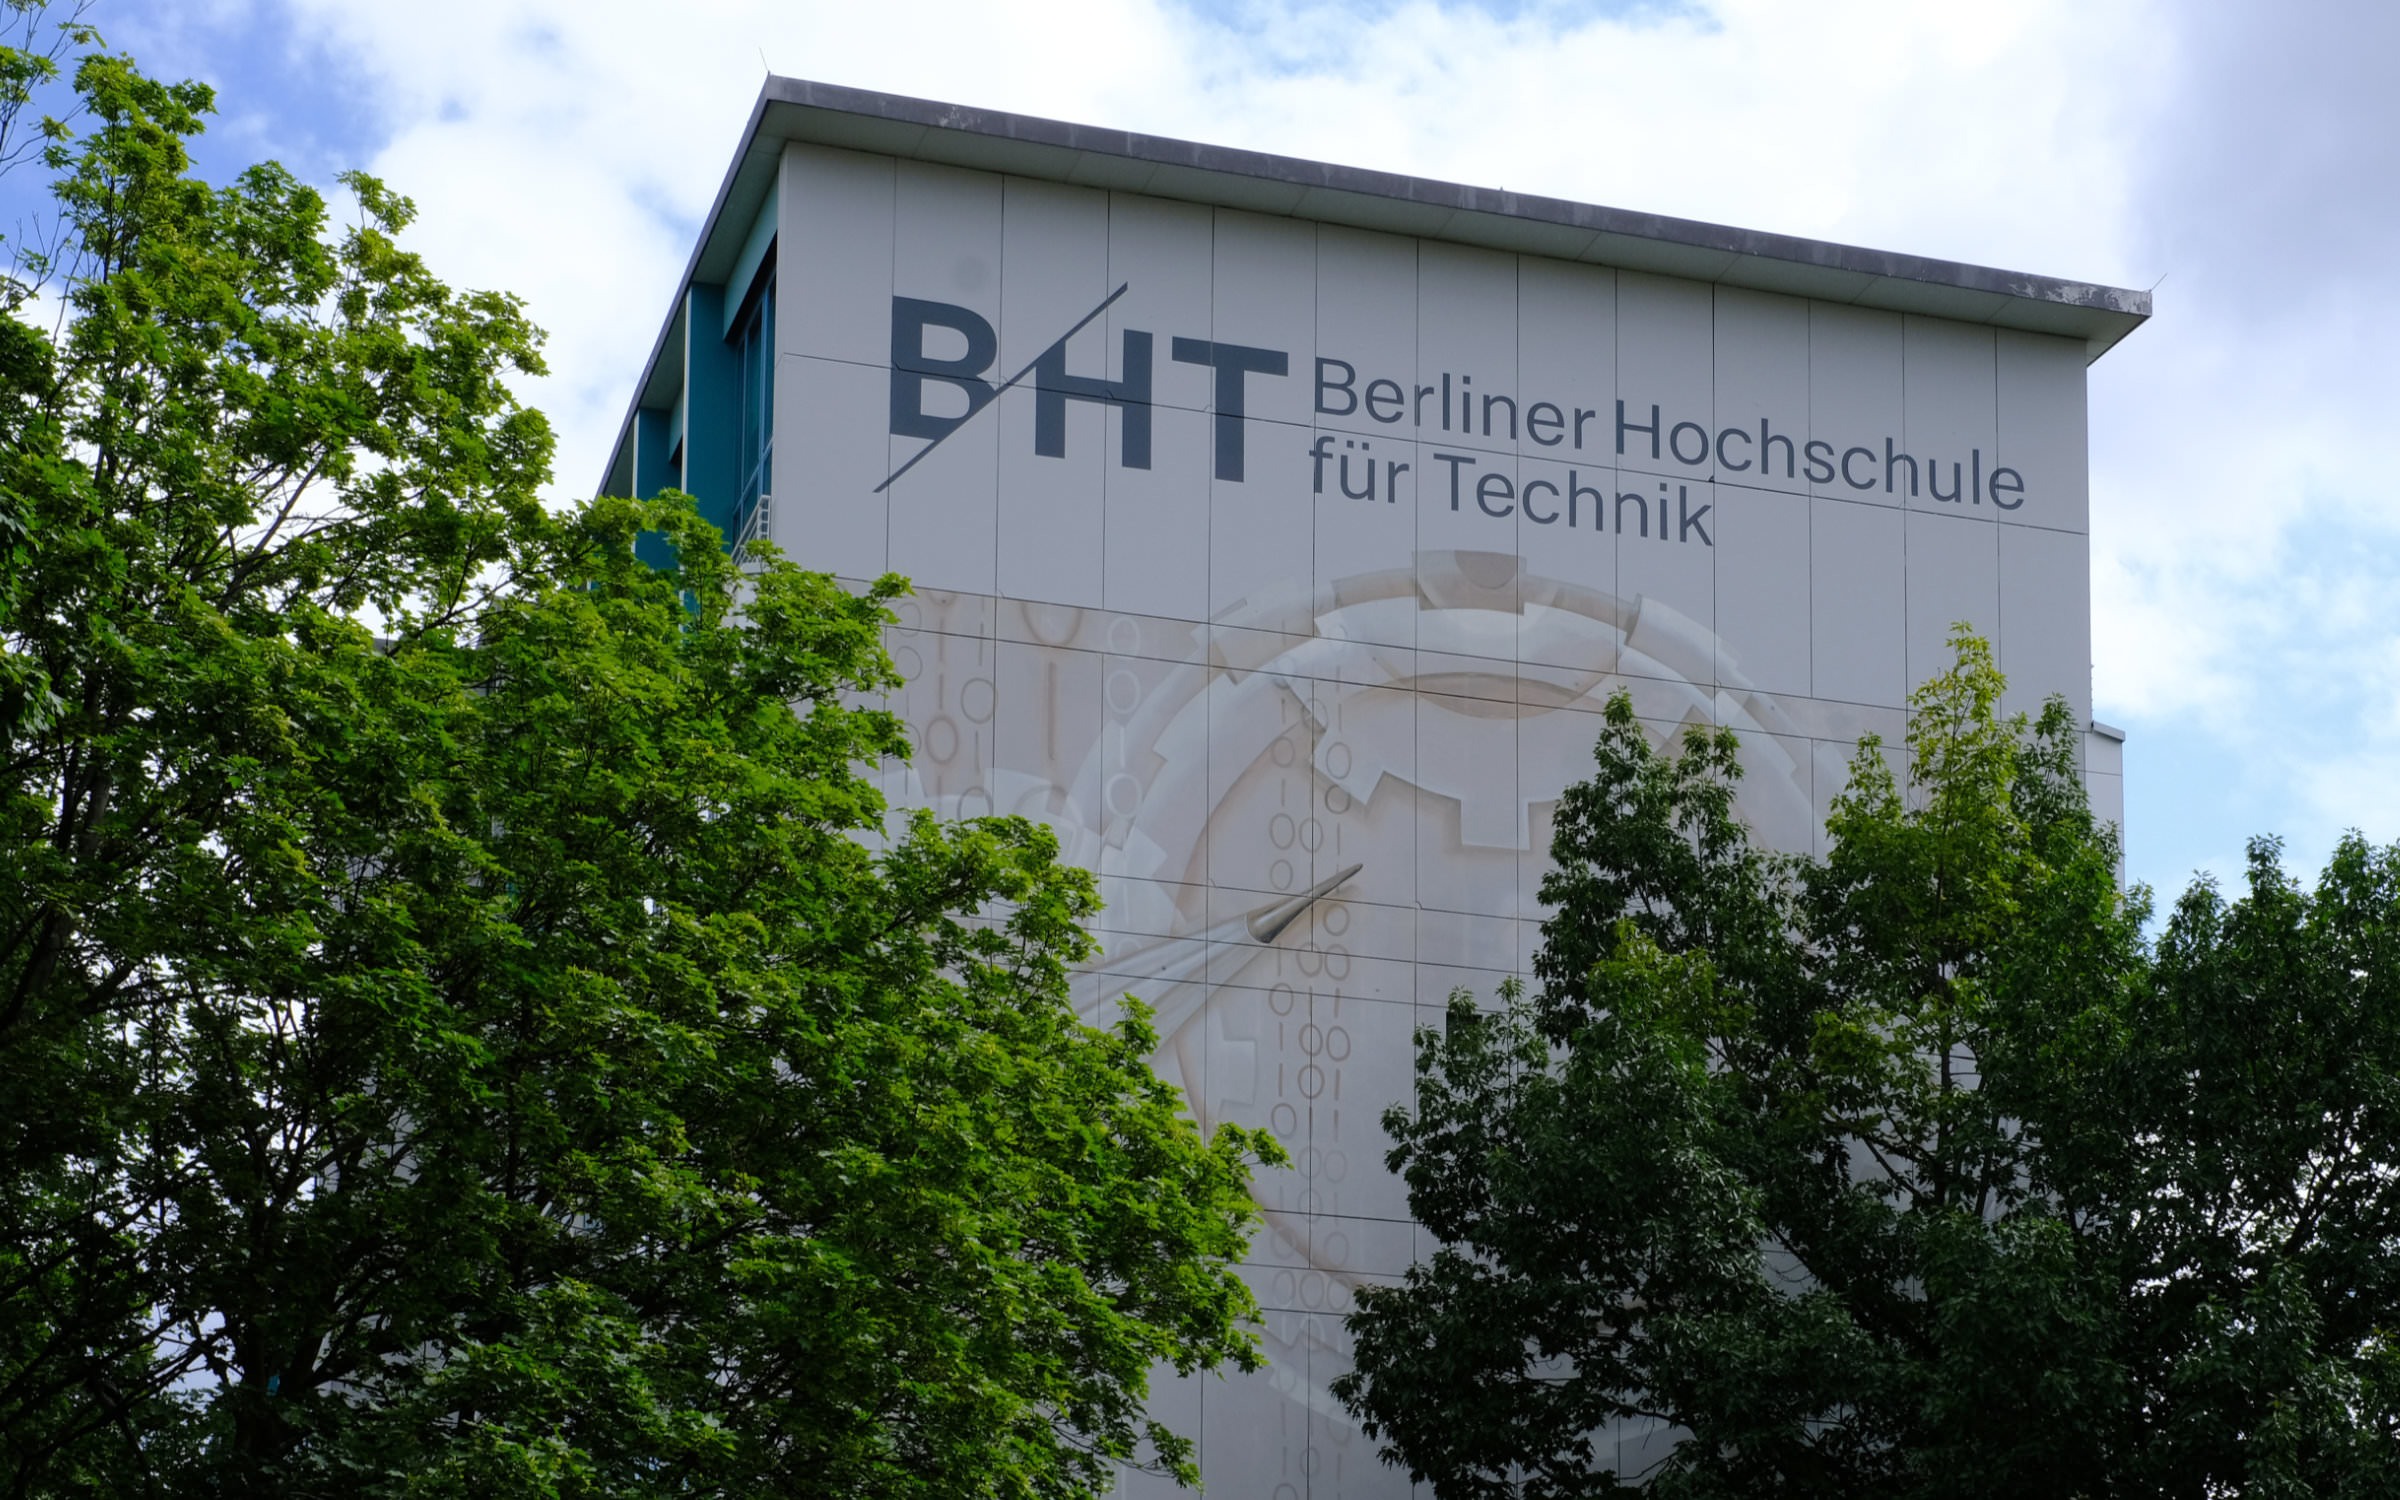 Fonts in Use: Typeface Case for the new corporate design of the Berliner Hochschule für Technik